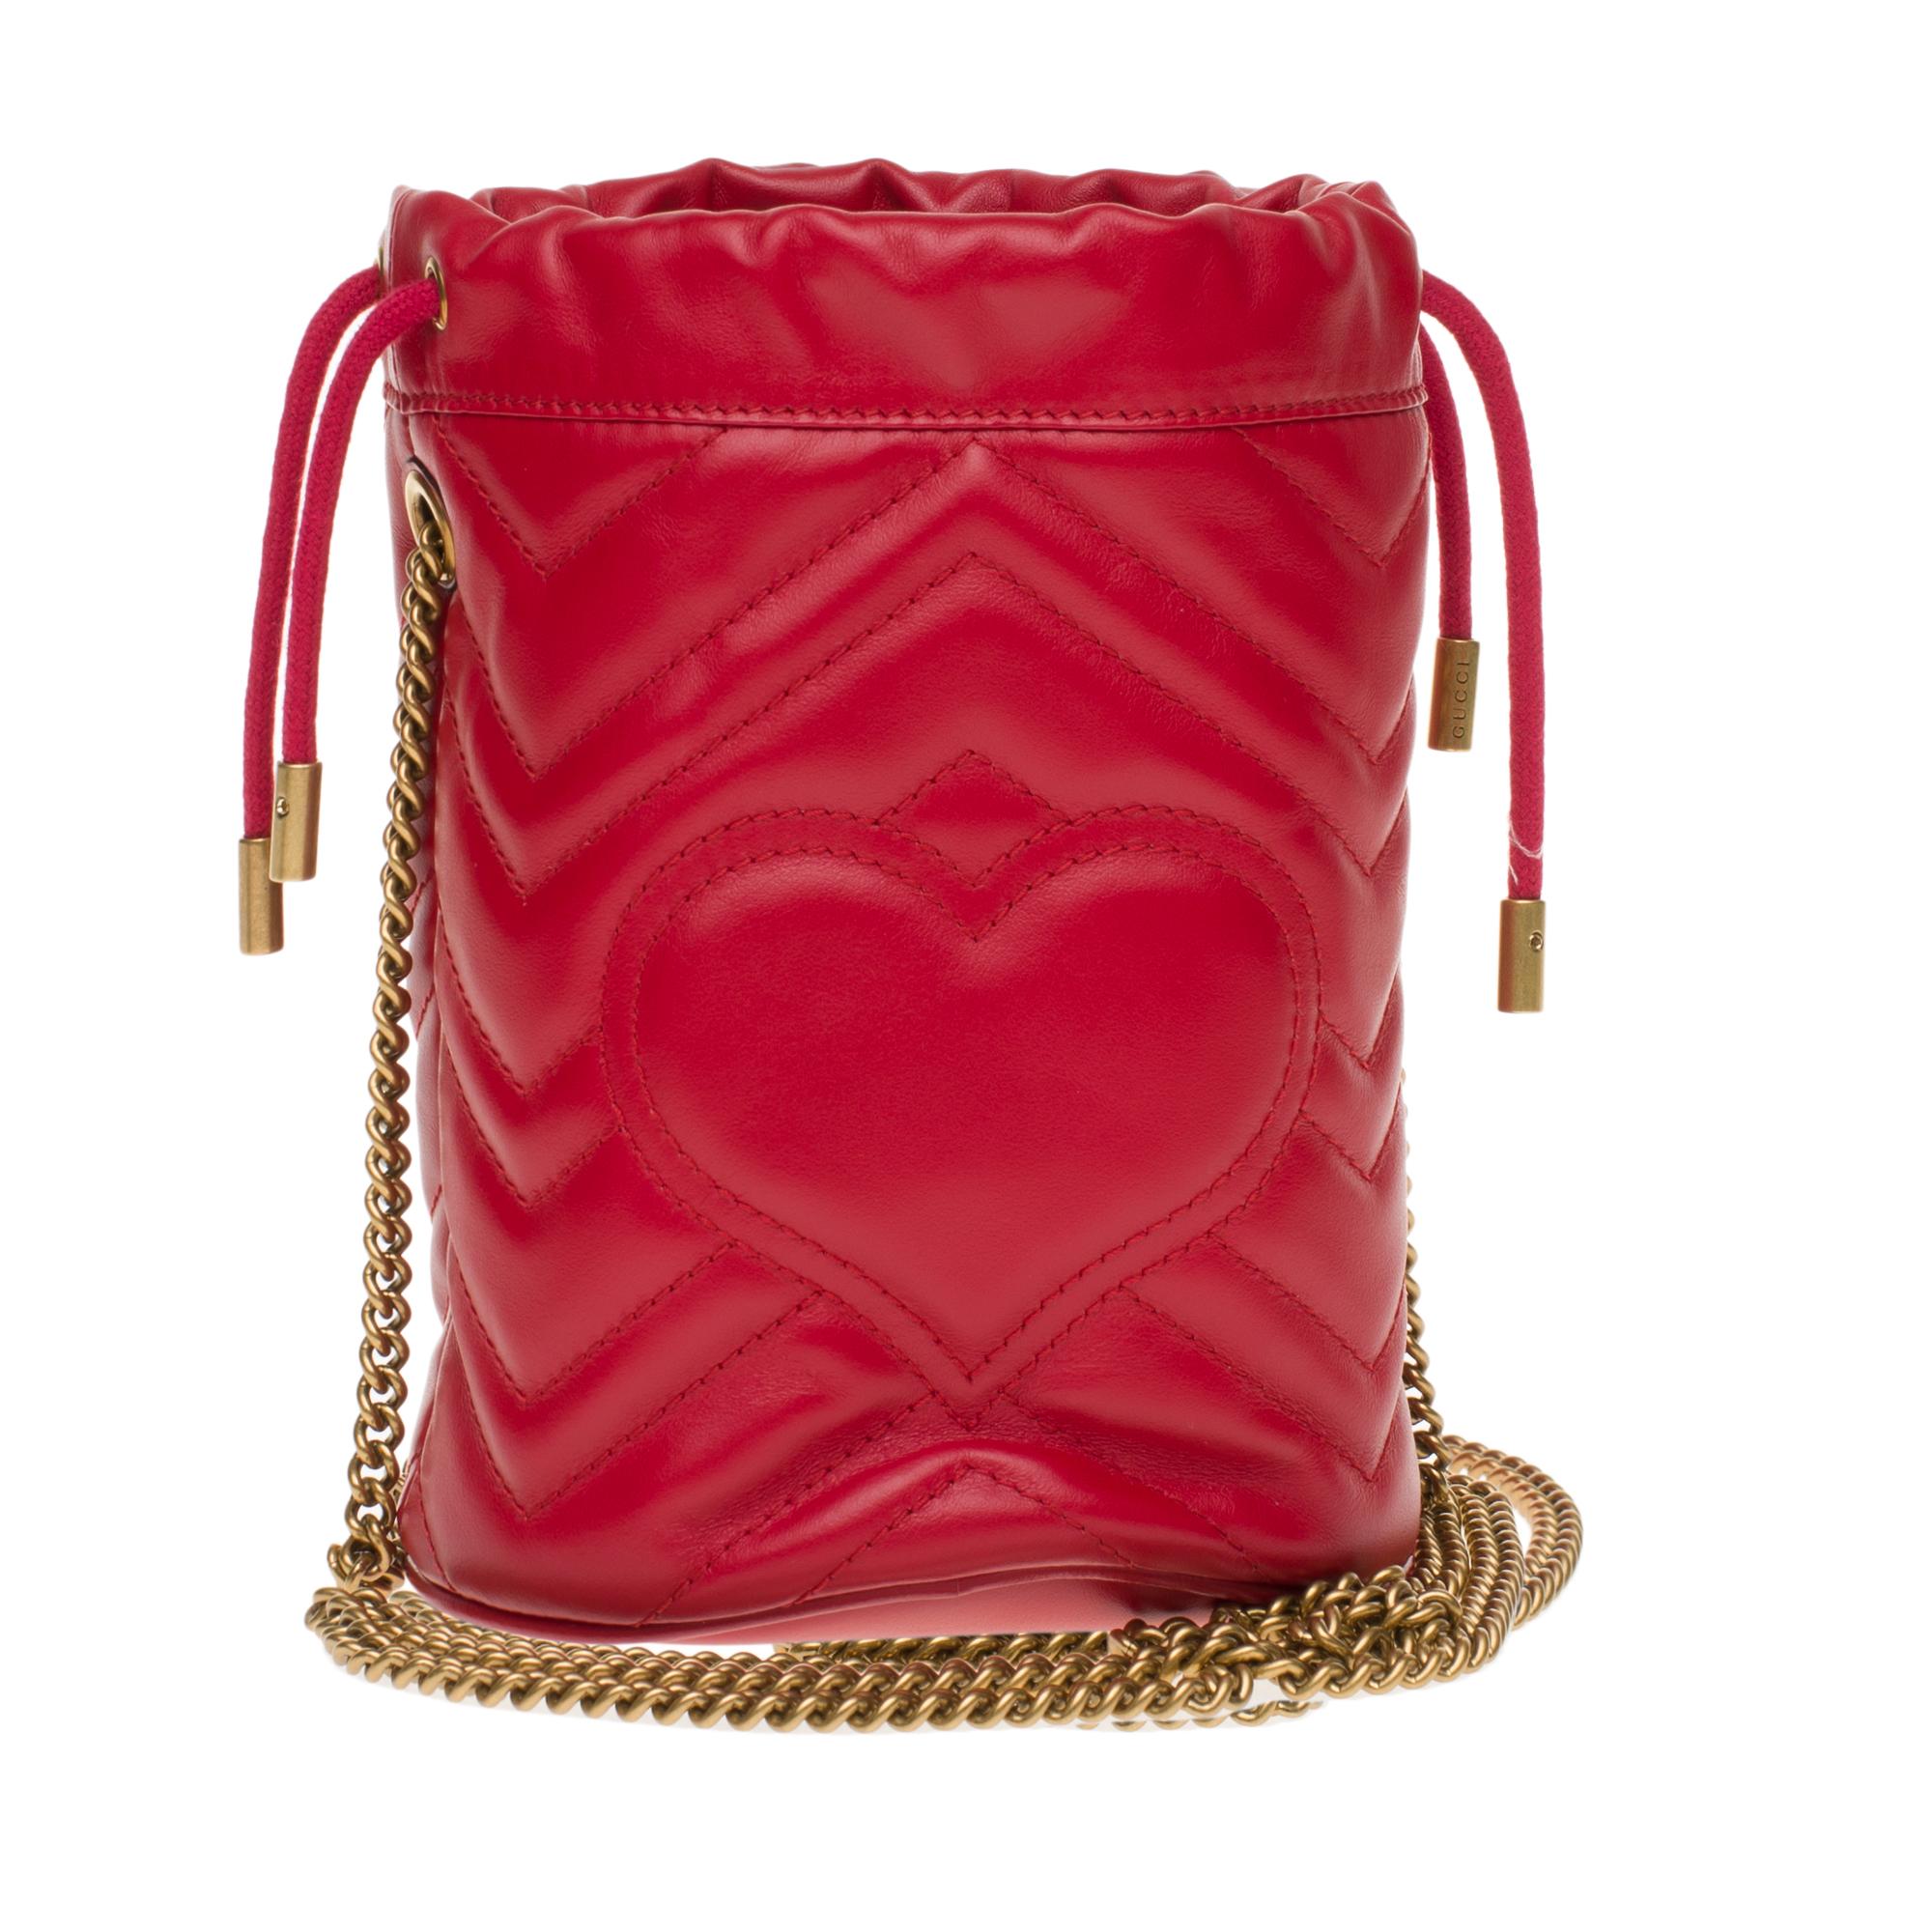 Gucci mini bucket bag GG Marmont made in red quilted leather with chevrons. Inspired by a model from the archives of the 70’s, a flagship period for the House, the Double G adorns the front of this accessory. With its chain shoulder strap and